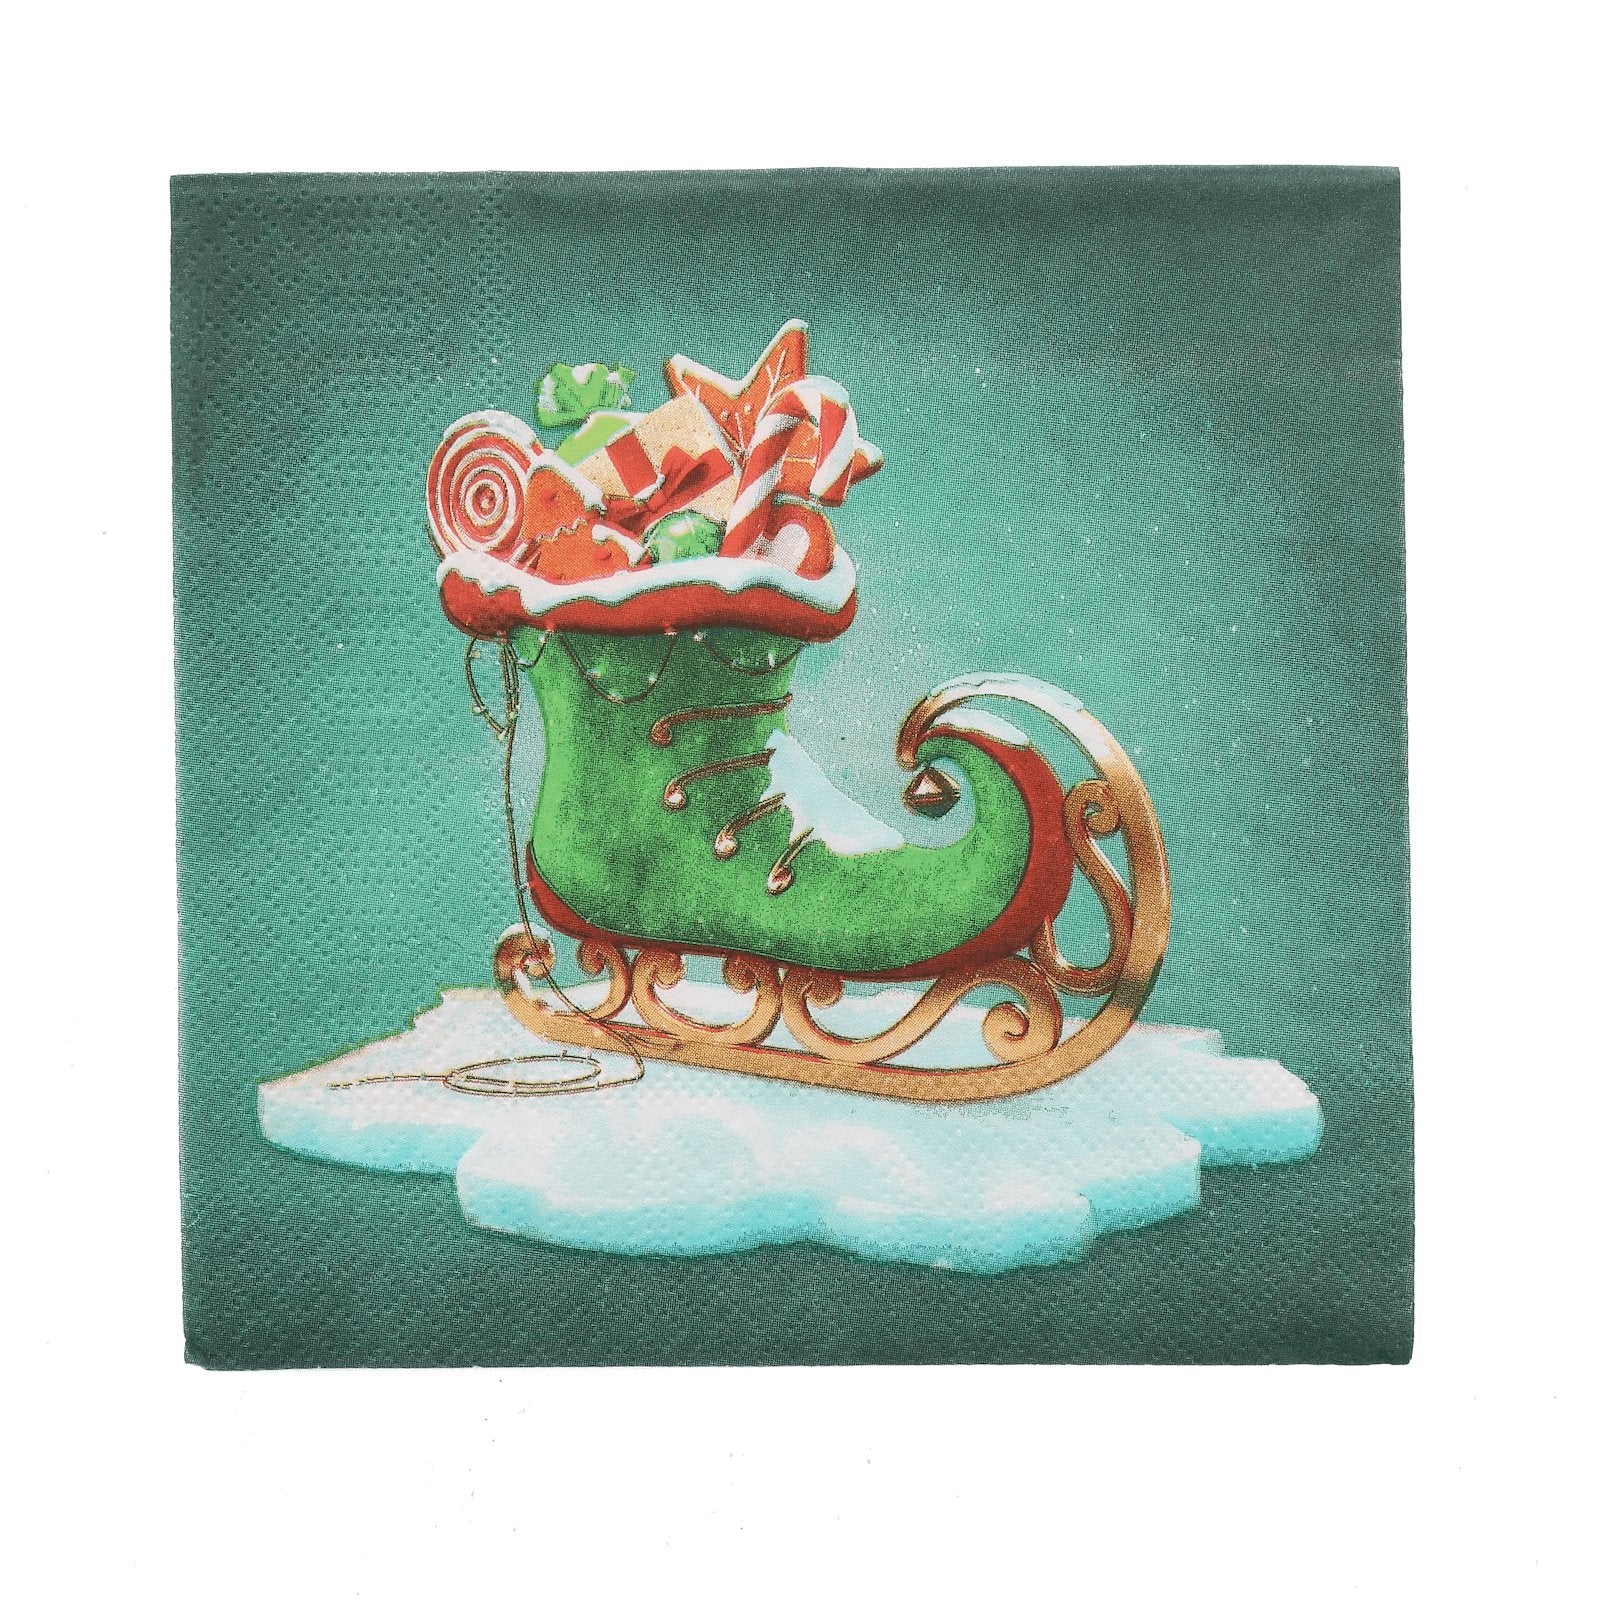 single green elf boot design napkin featuring elf skate filled with christmas gifts